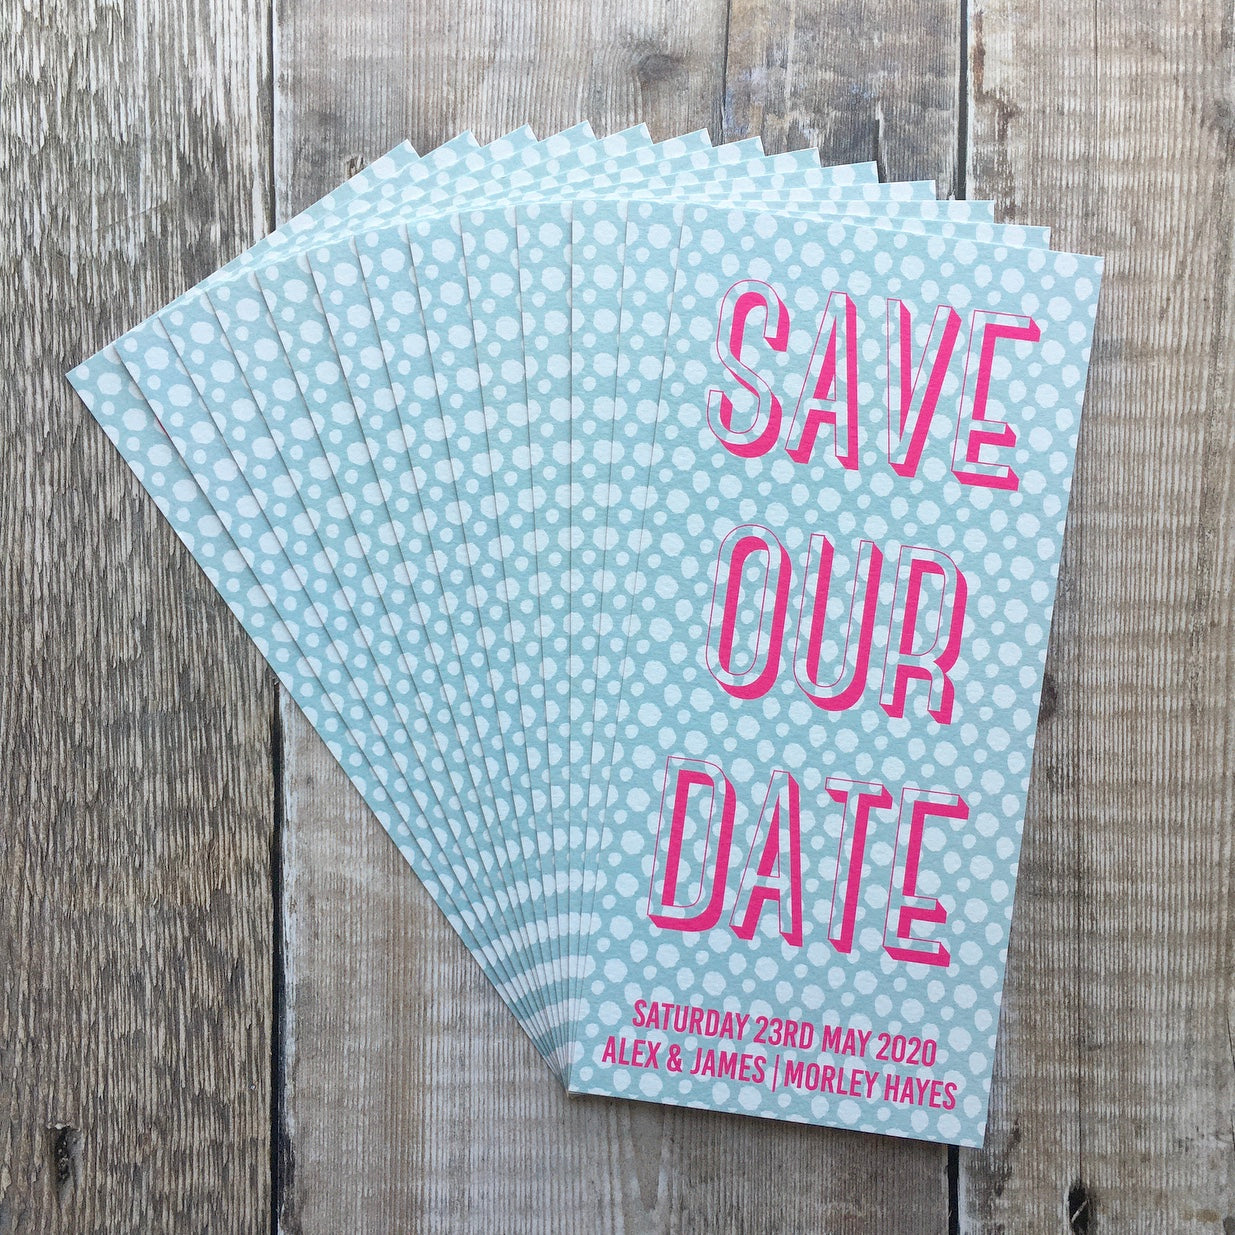 Bookmark-style wedding invitation/save the date. 99mm x 210mm. Pale blue background, with a white spotted pattern. Text is typographic, and written in fluorescent pink.